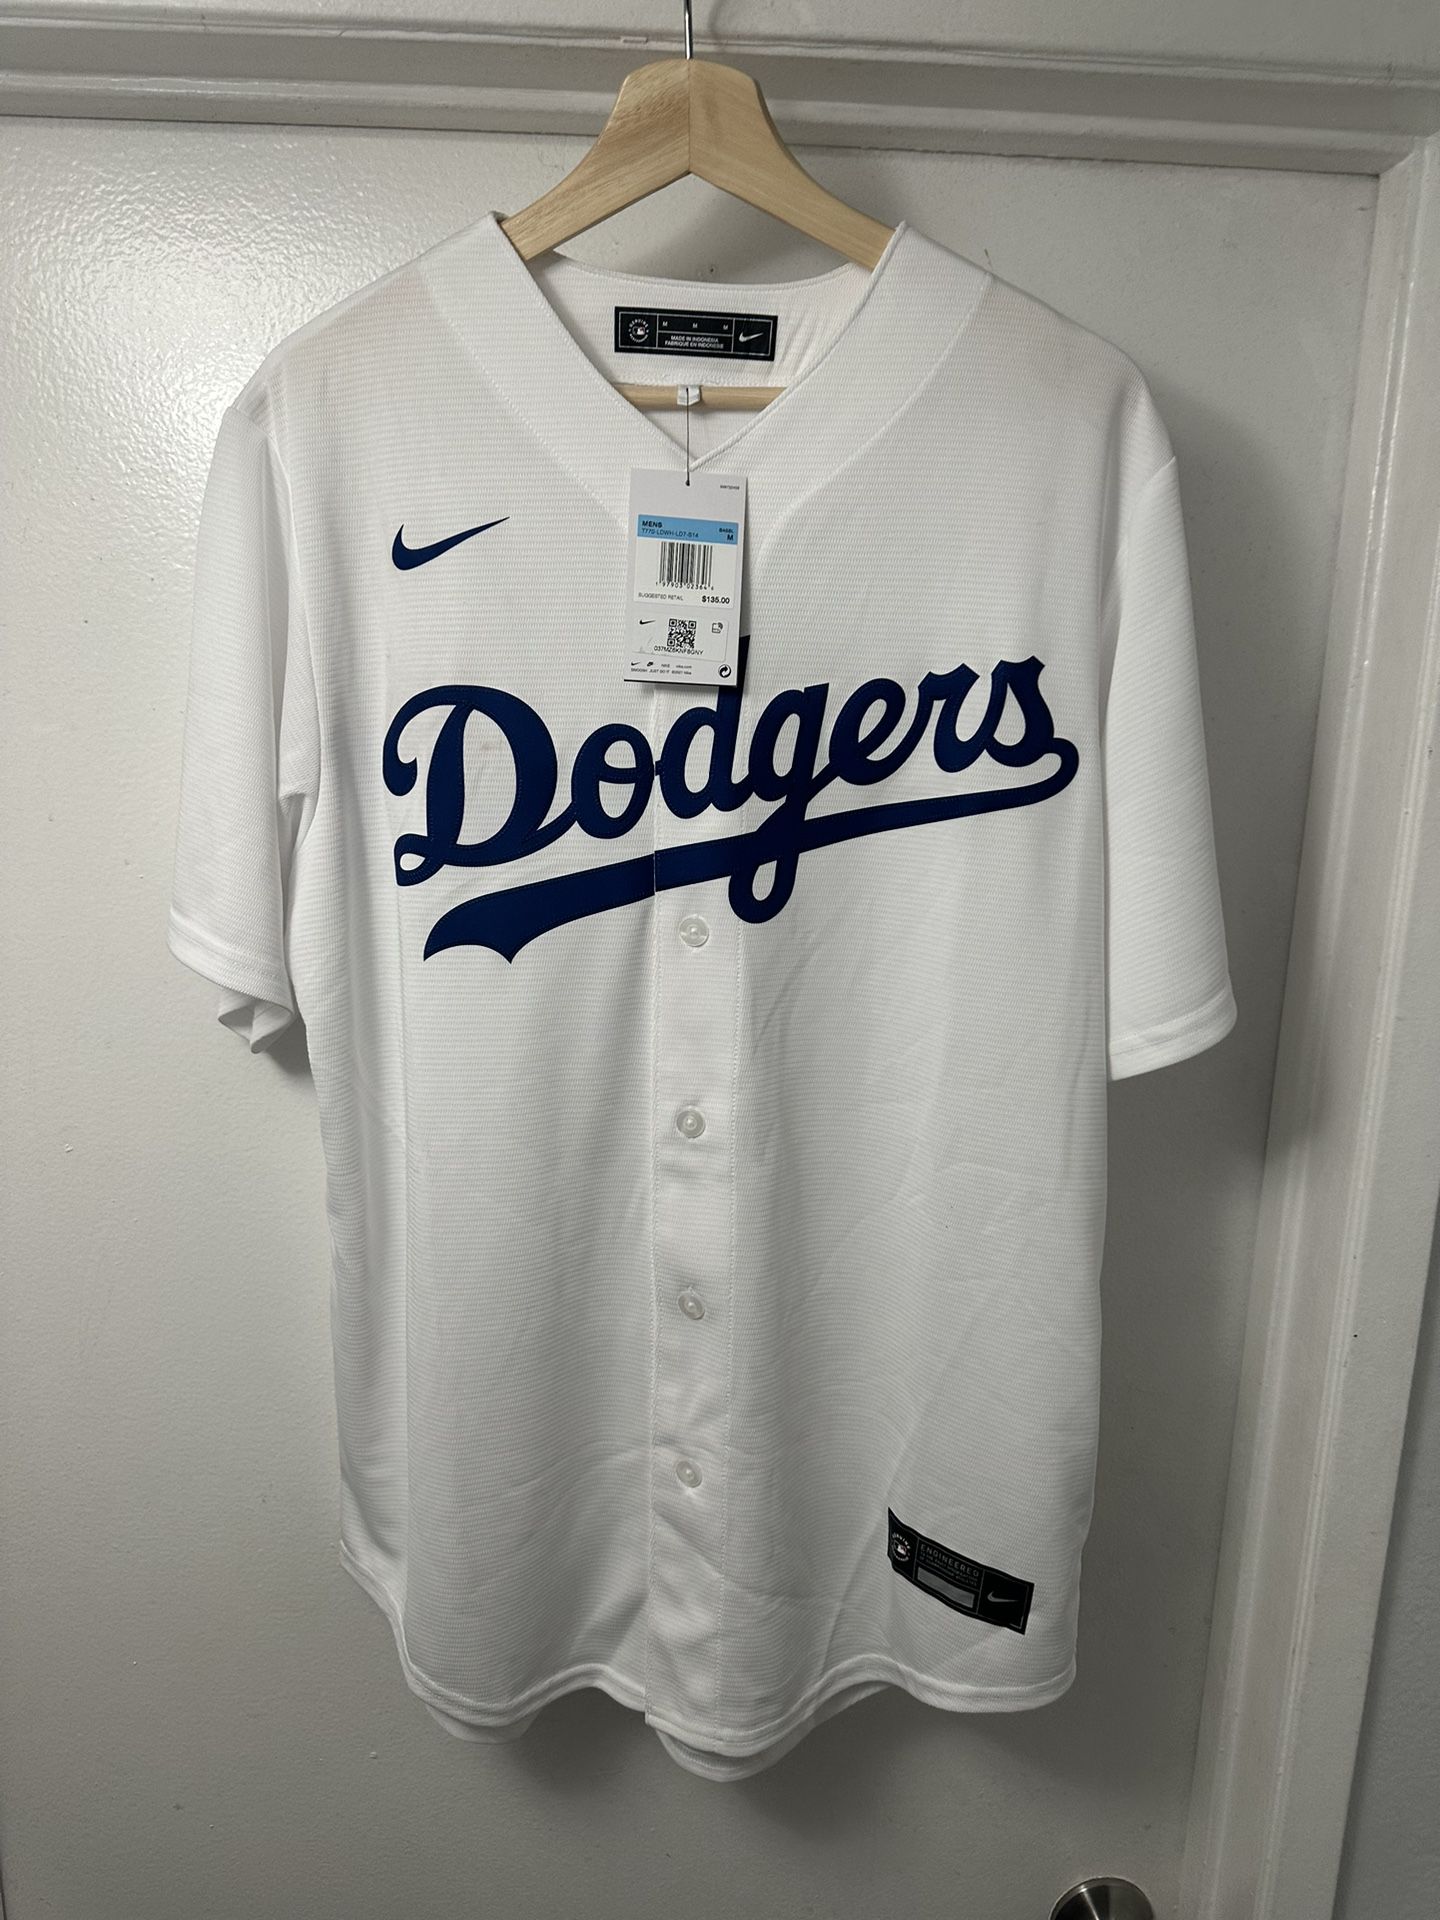 DODGERS (WHITE JERSEY)